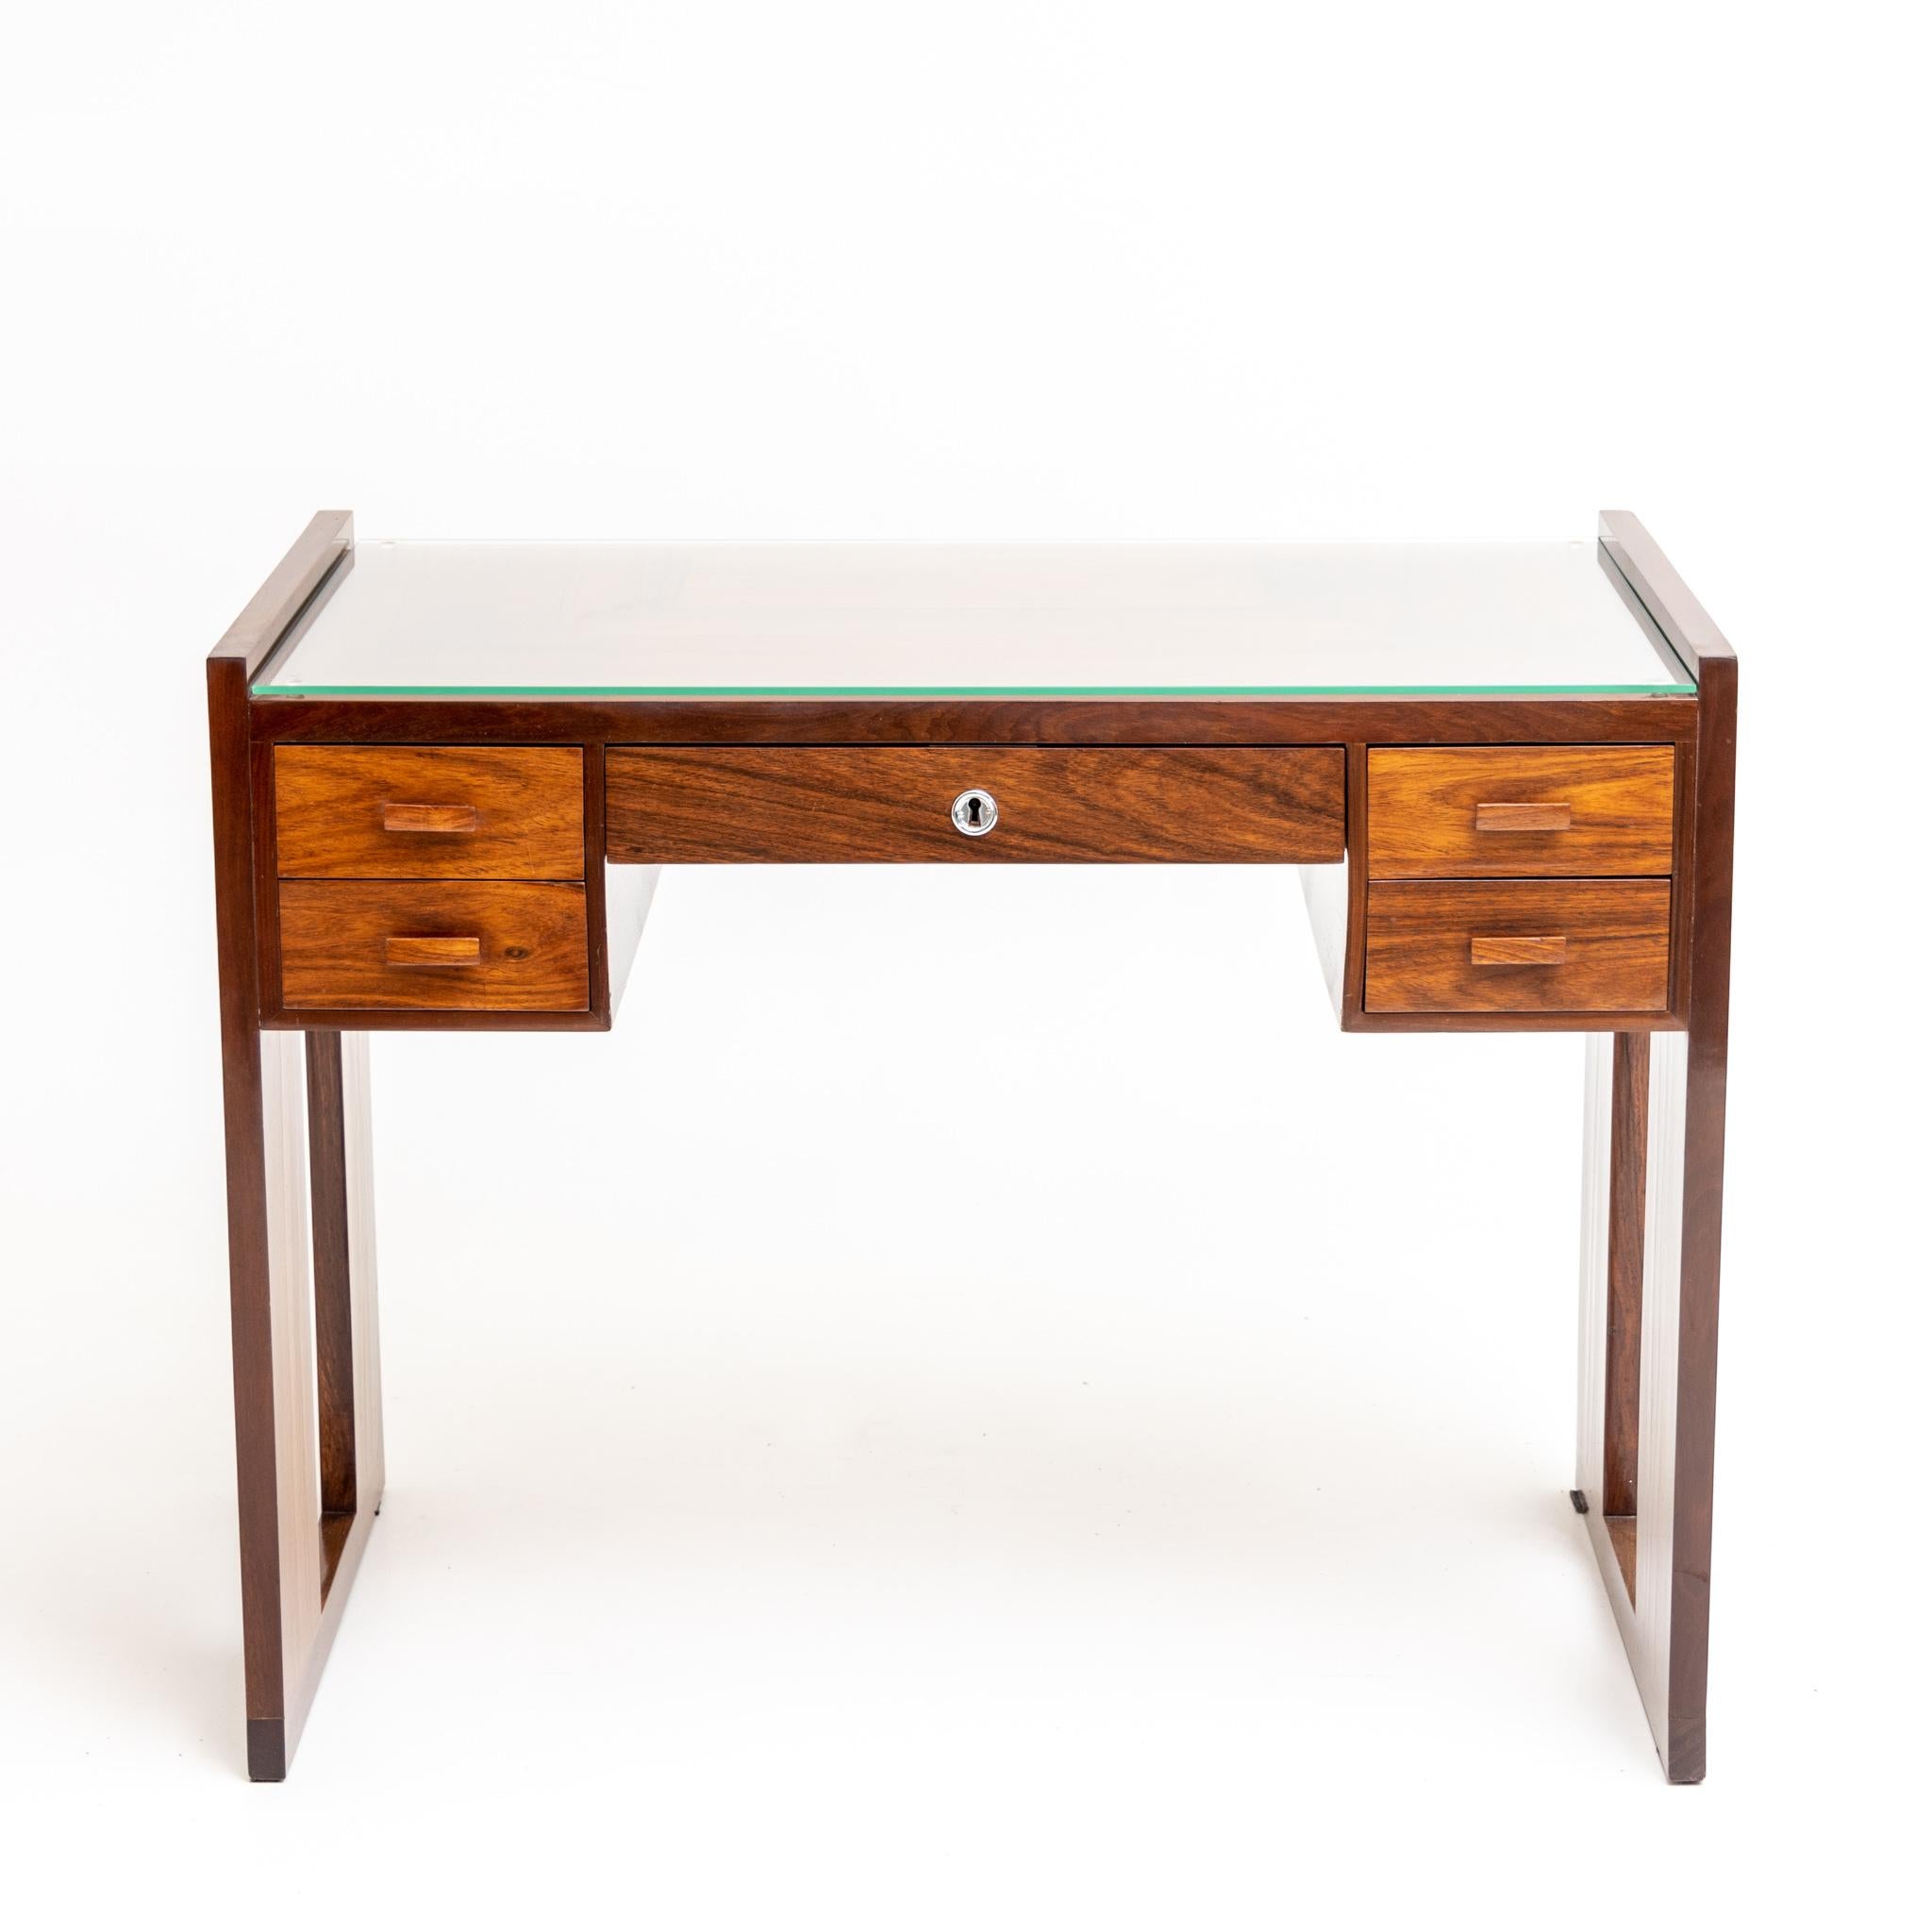 Art Deco desk with five drawers and straight sides with rectangular recess. The top of the desk is protected with a glass top.